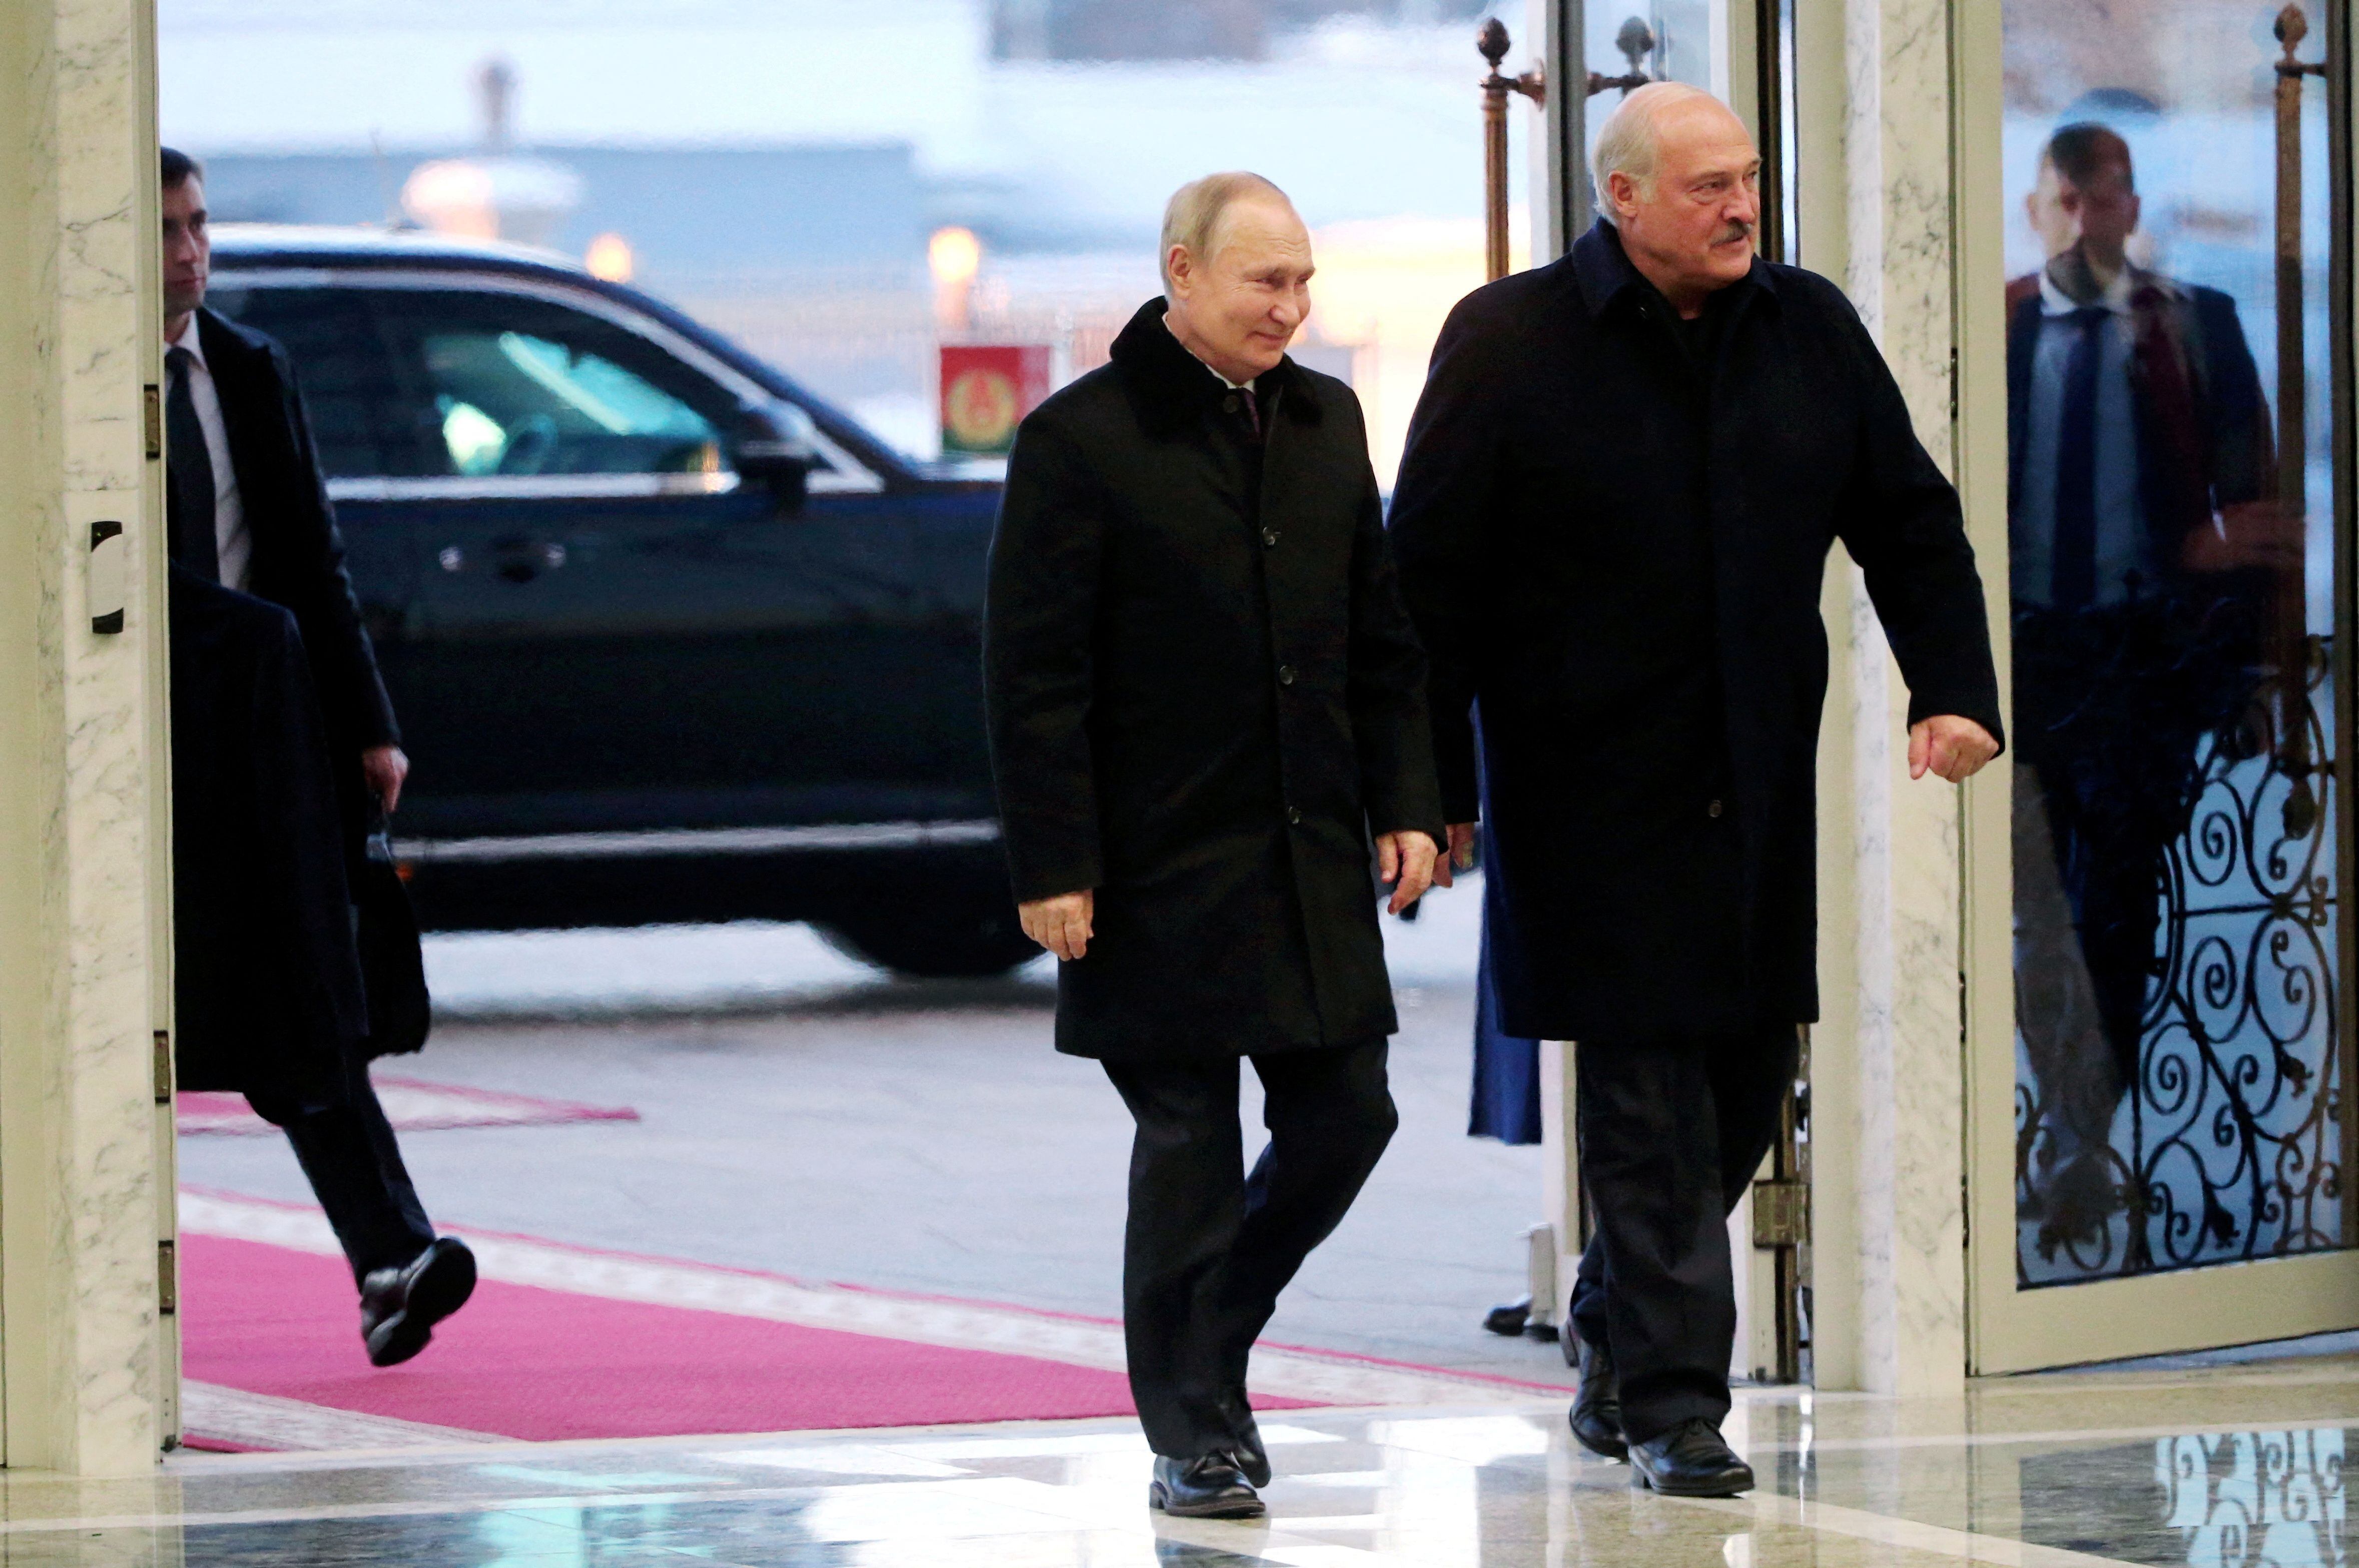 FILE PHOTO: Russian President Vladimir Putin and Belarusian President Alexander Lukashenko arrive for a meeting at the Palace of Independence in Minsk, Belarus December 19, 2022. Sputnik/Konstantin Zavrazhin/Pool via REUTERS ATTENTION EDITORS - THIS IMAGE WAS PROVIDED BY A THIRD PARTY./File Photo